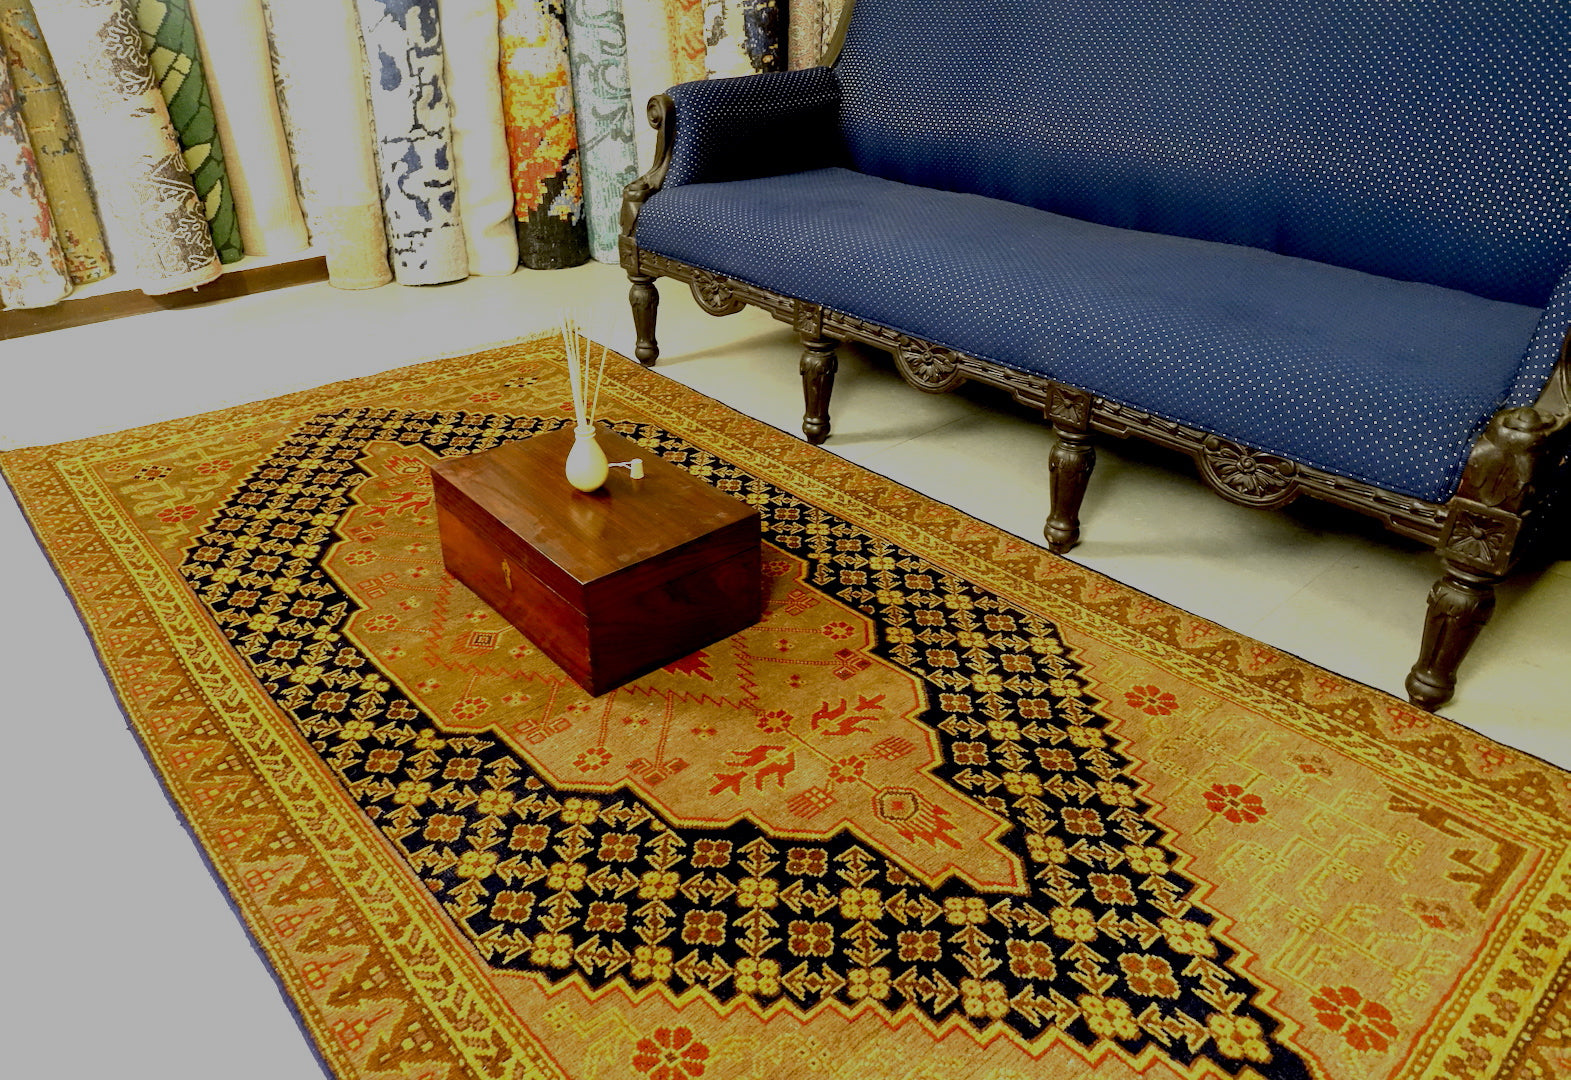 It is a 4 feet by 8 feet antique wool rug from samarkand. The colours used on the rug are orange,gold and blue.